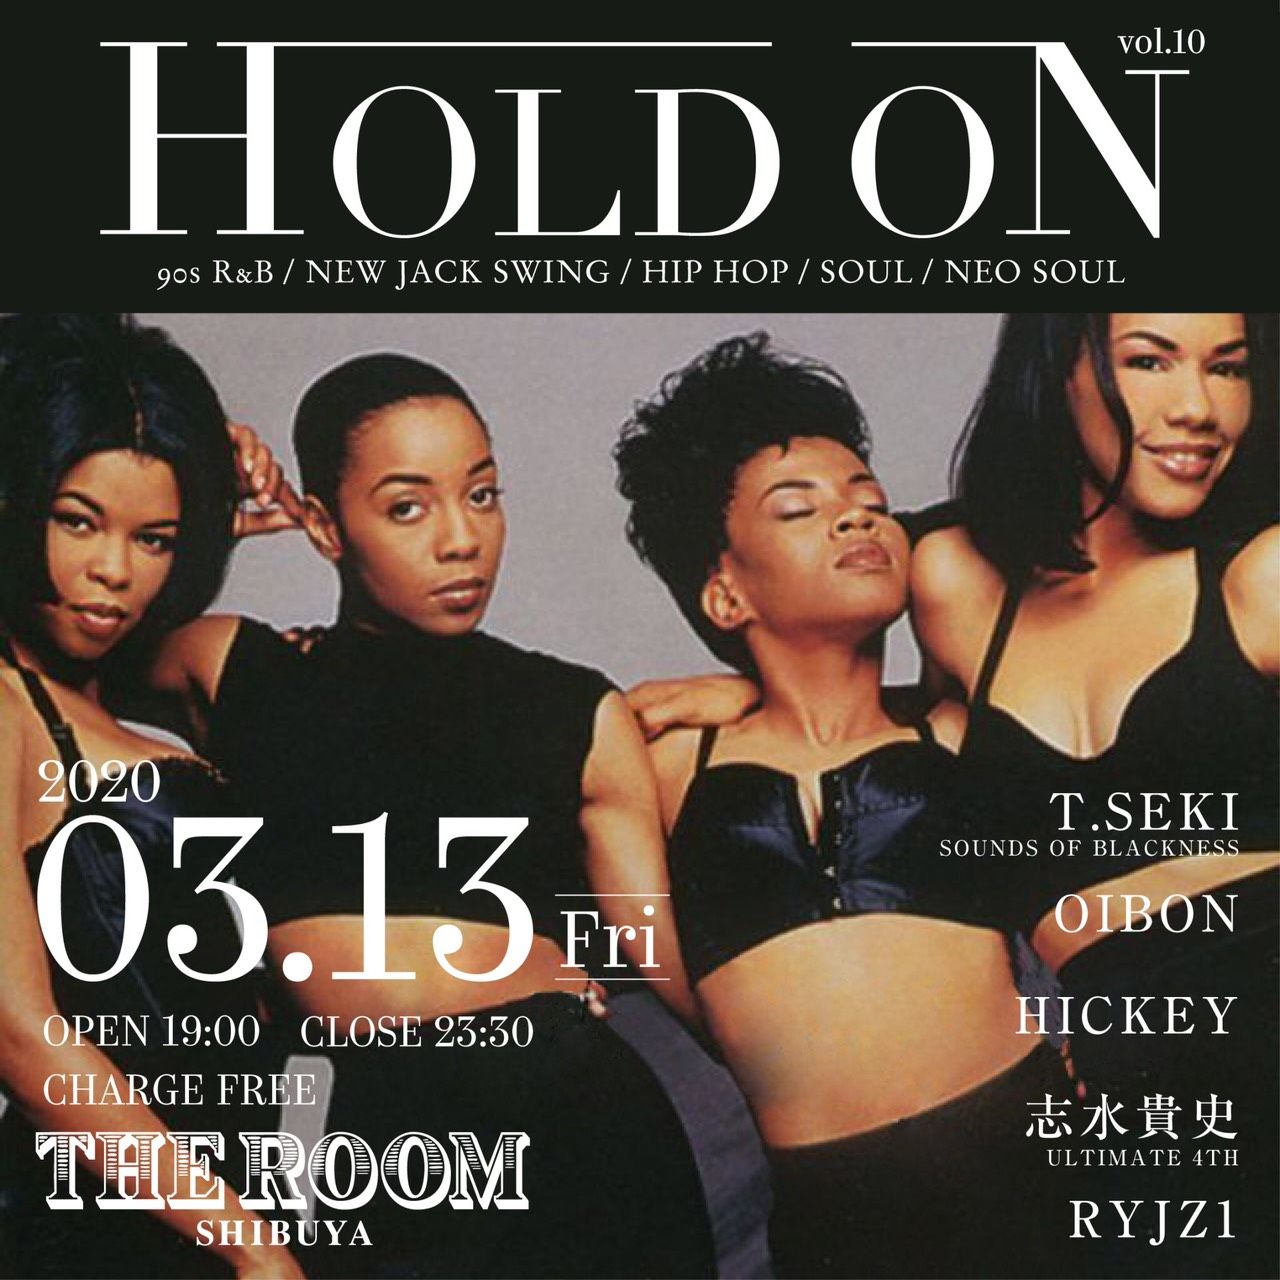 HOLD ON Vol.10